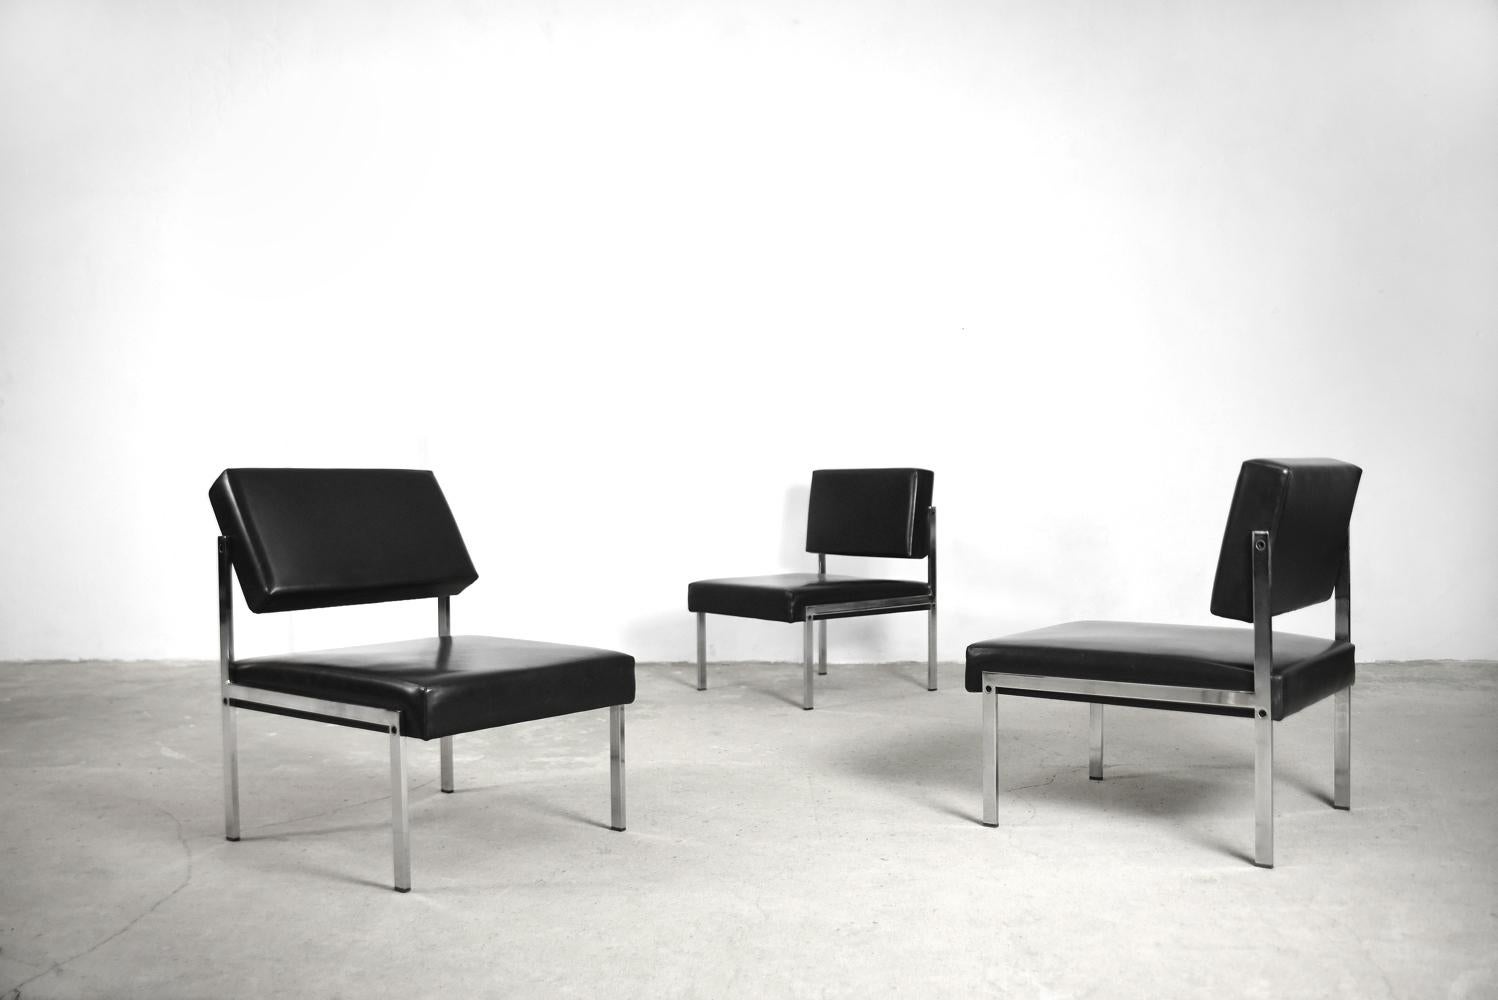 Minimalist German Chrome and Leather Modular Lounge Chairs from Brune, 1960s In Good Condition For Sale In Warsaw, PL